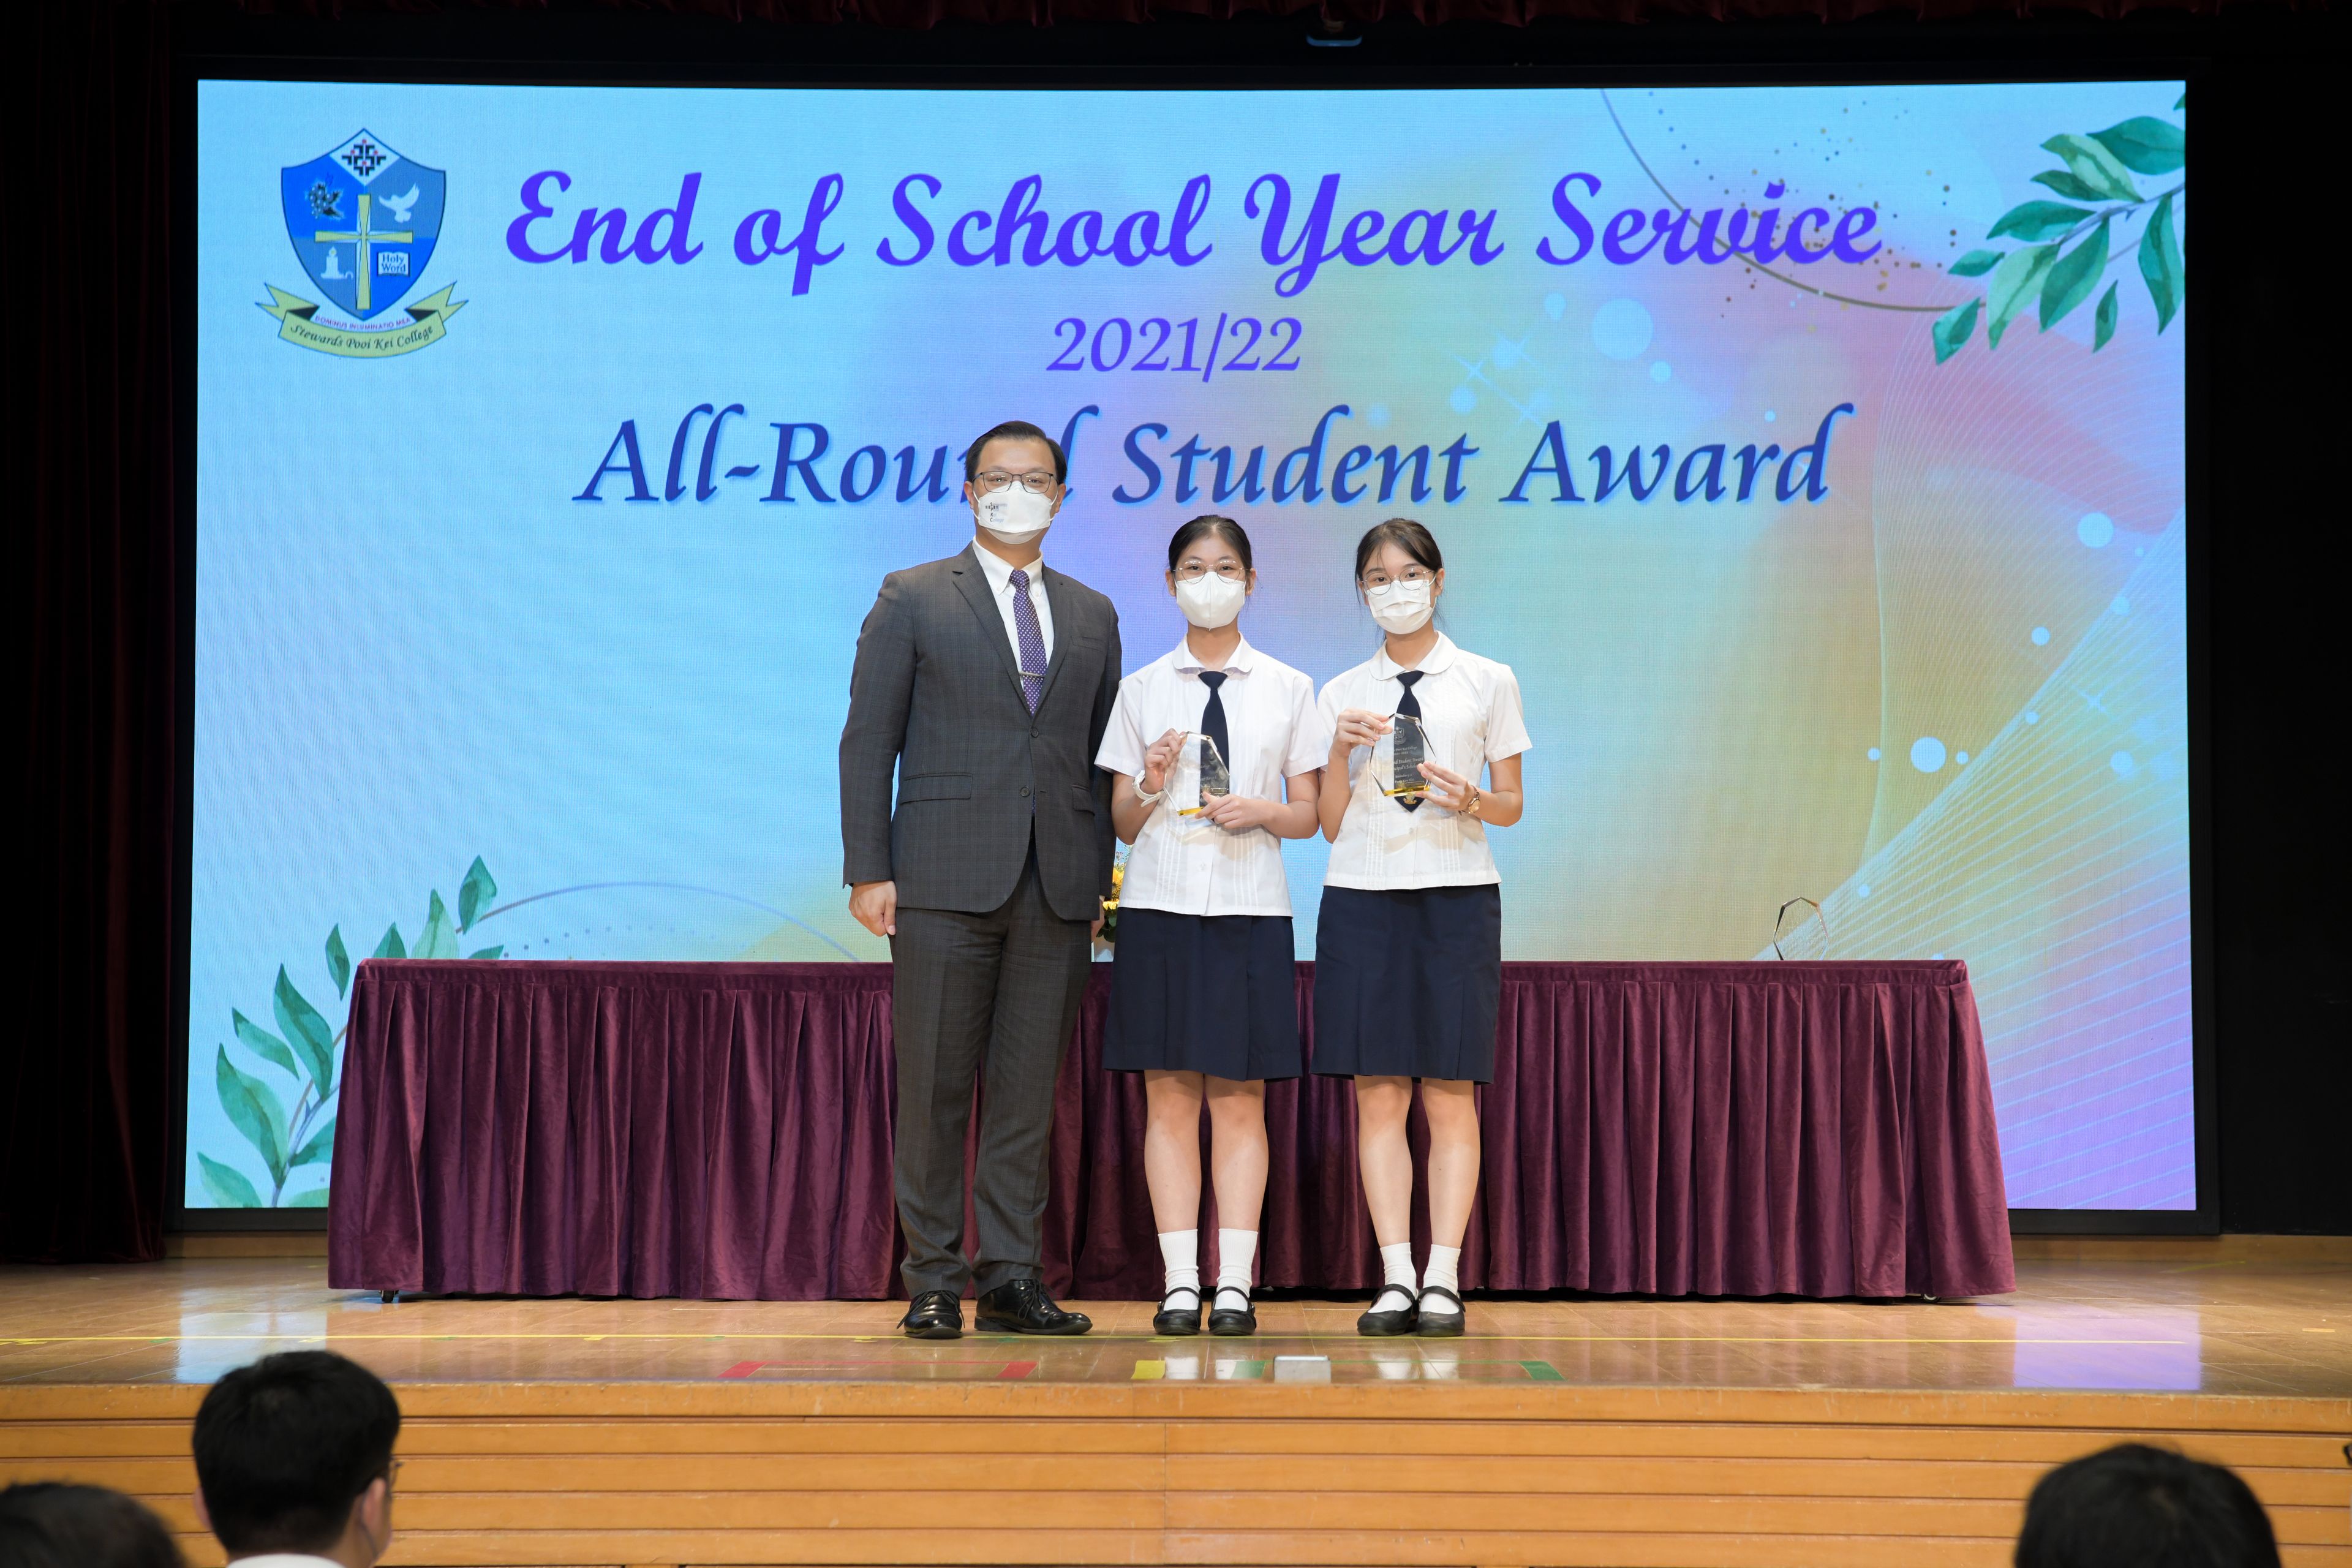 End of School Year Service